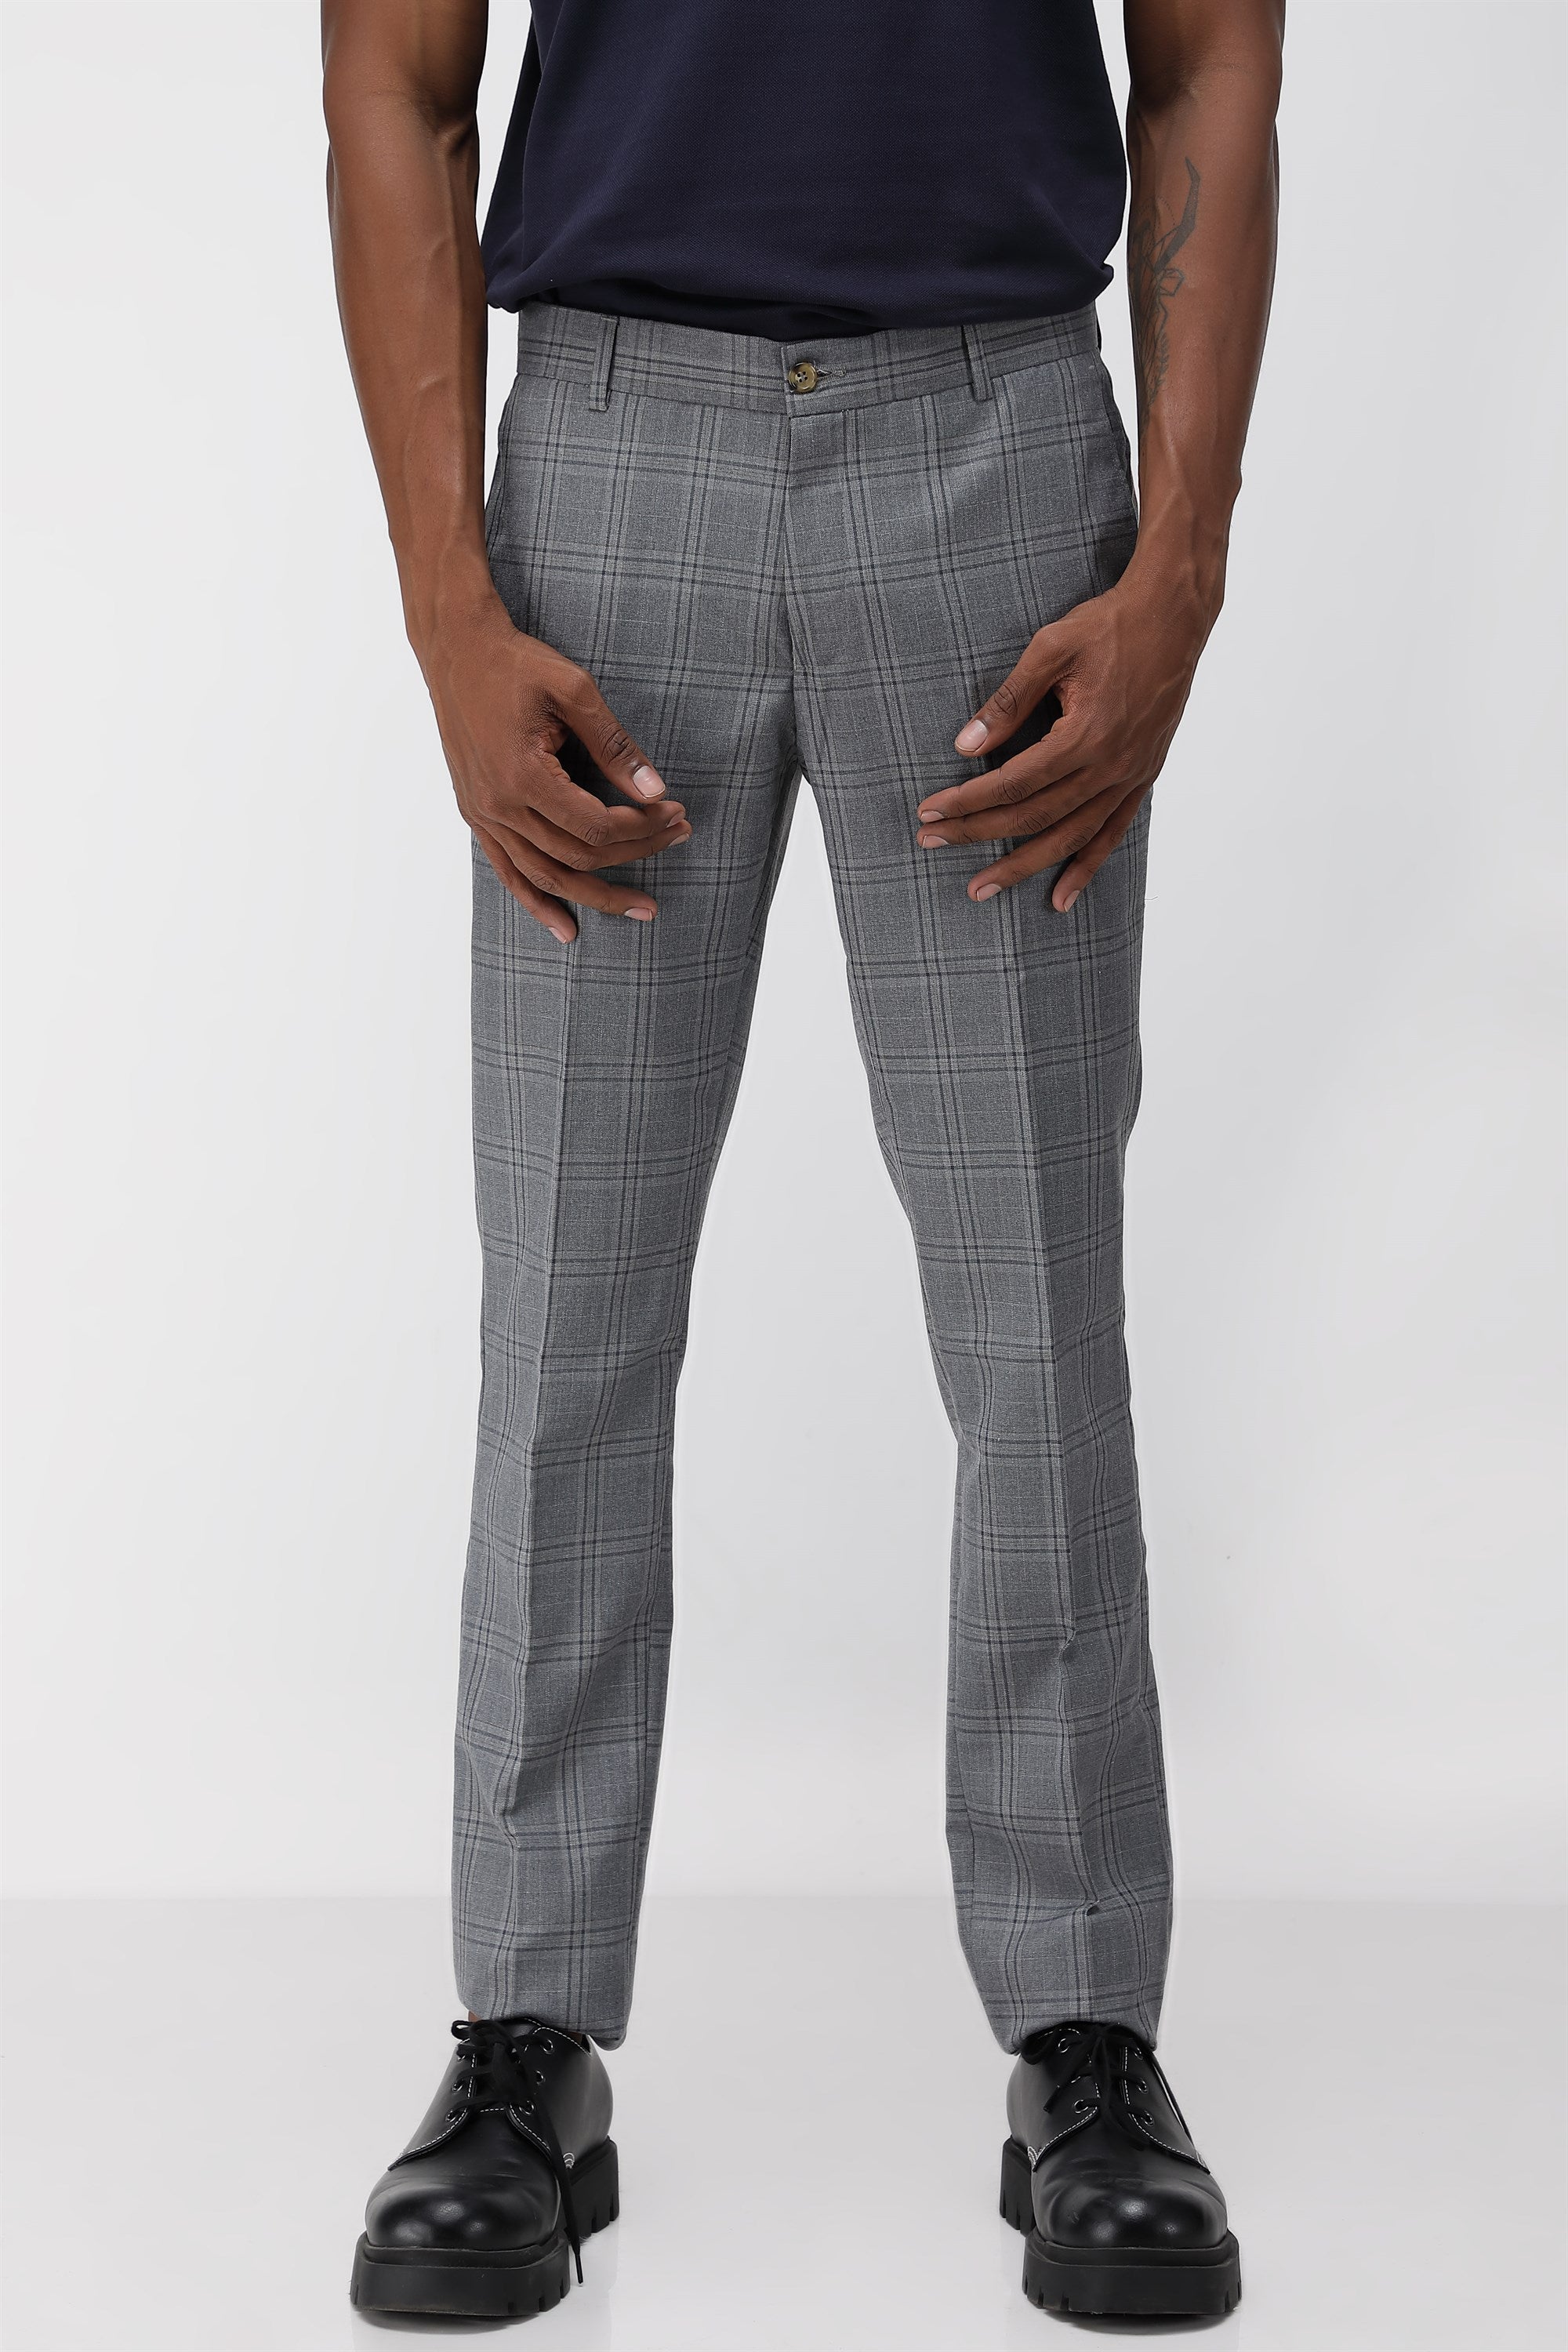 trendy casual / formal check pants for womens.